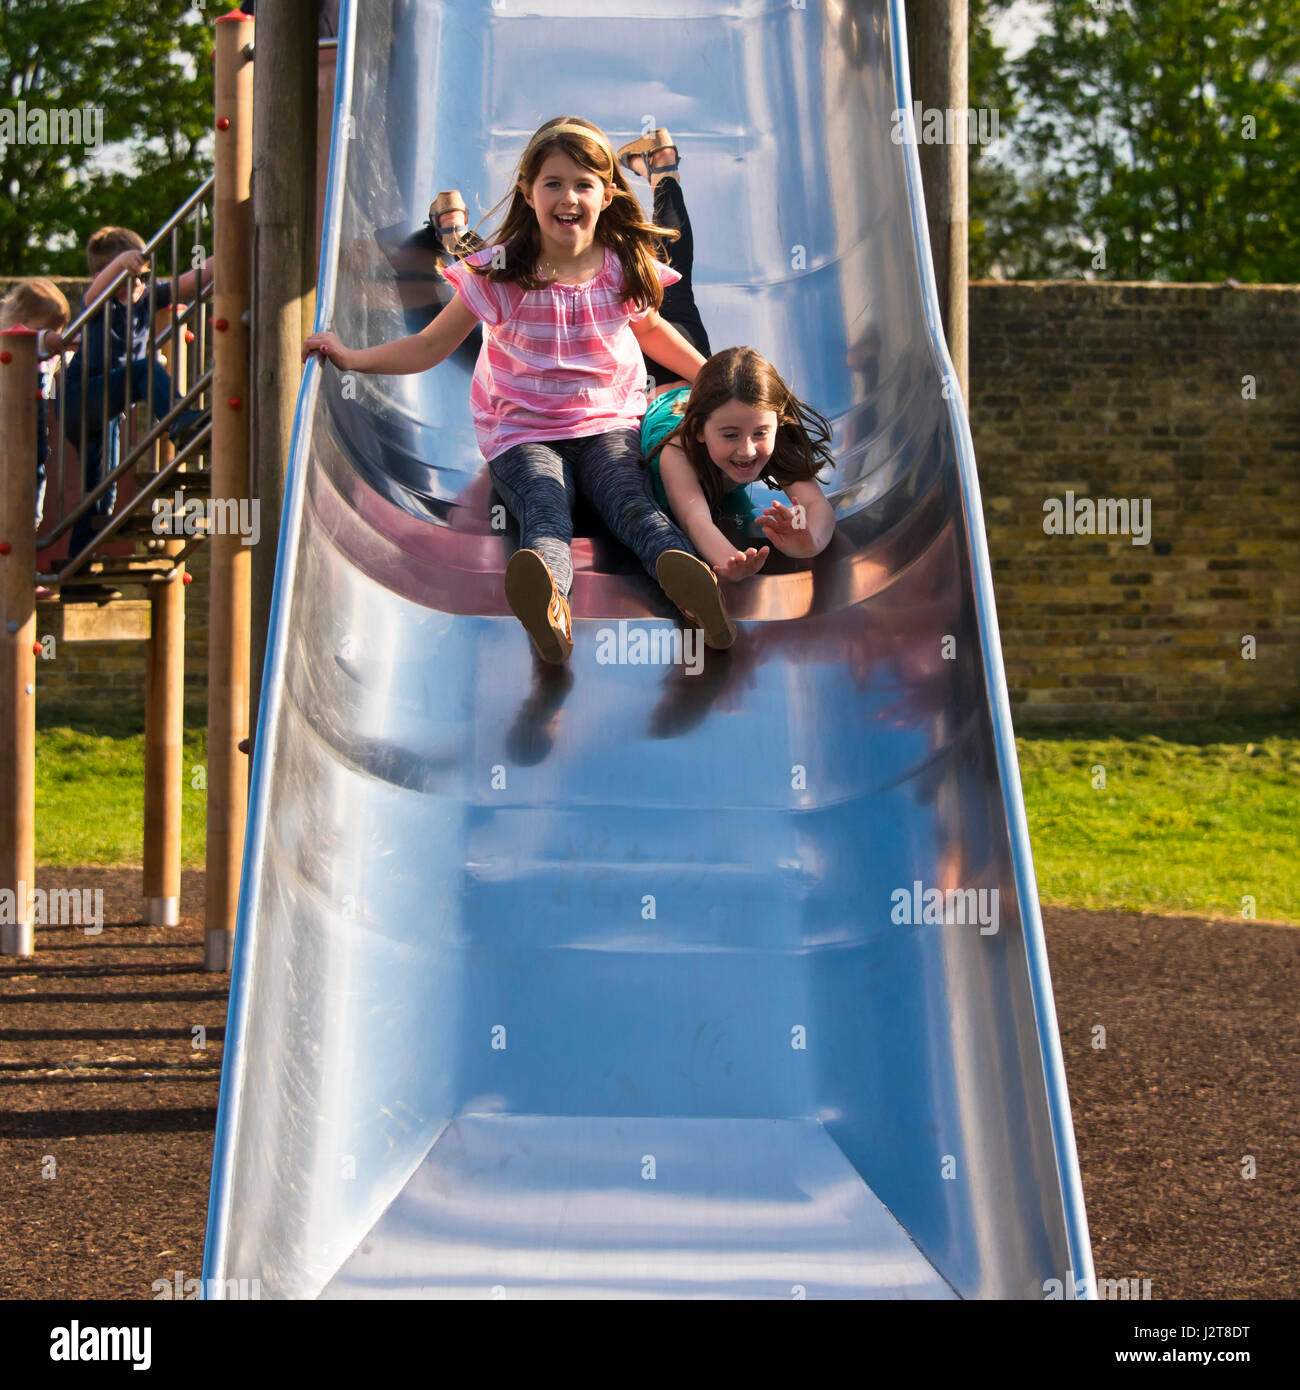 Vertical portrait of two girls sliding down a slide together in the sunshine. Stock Photo